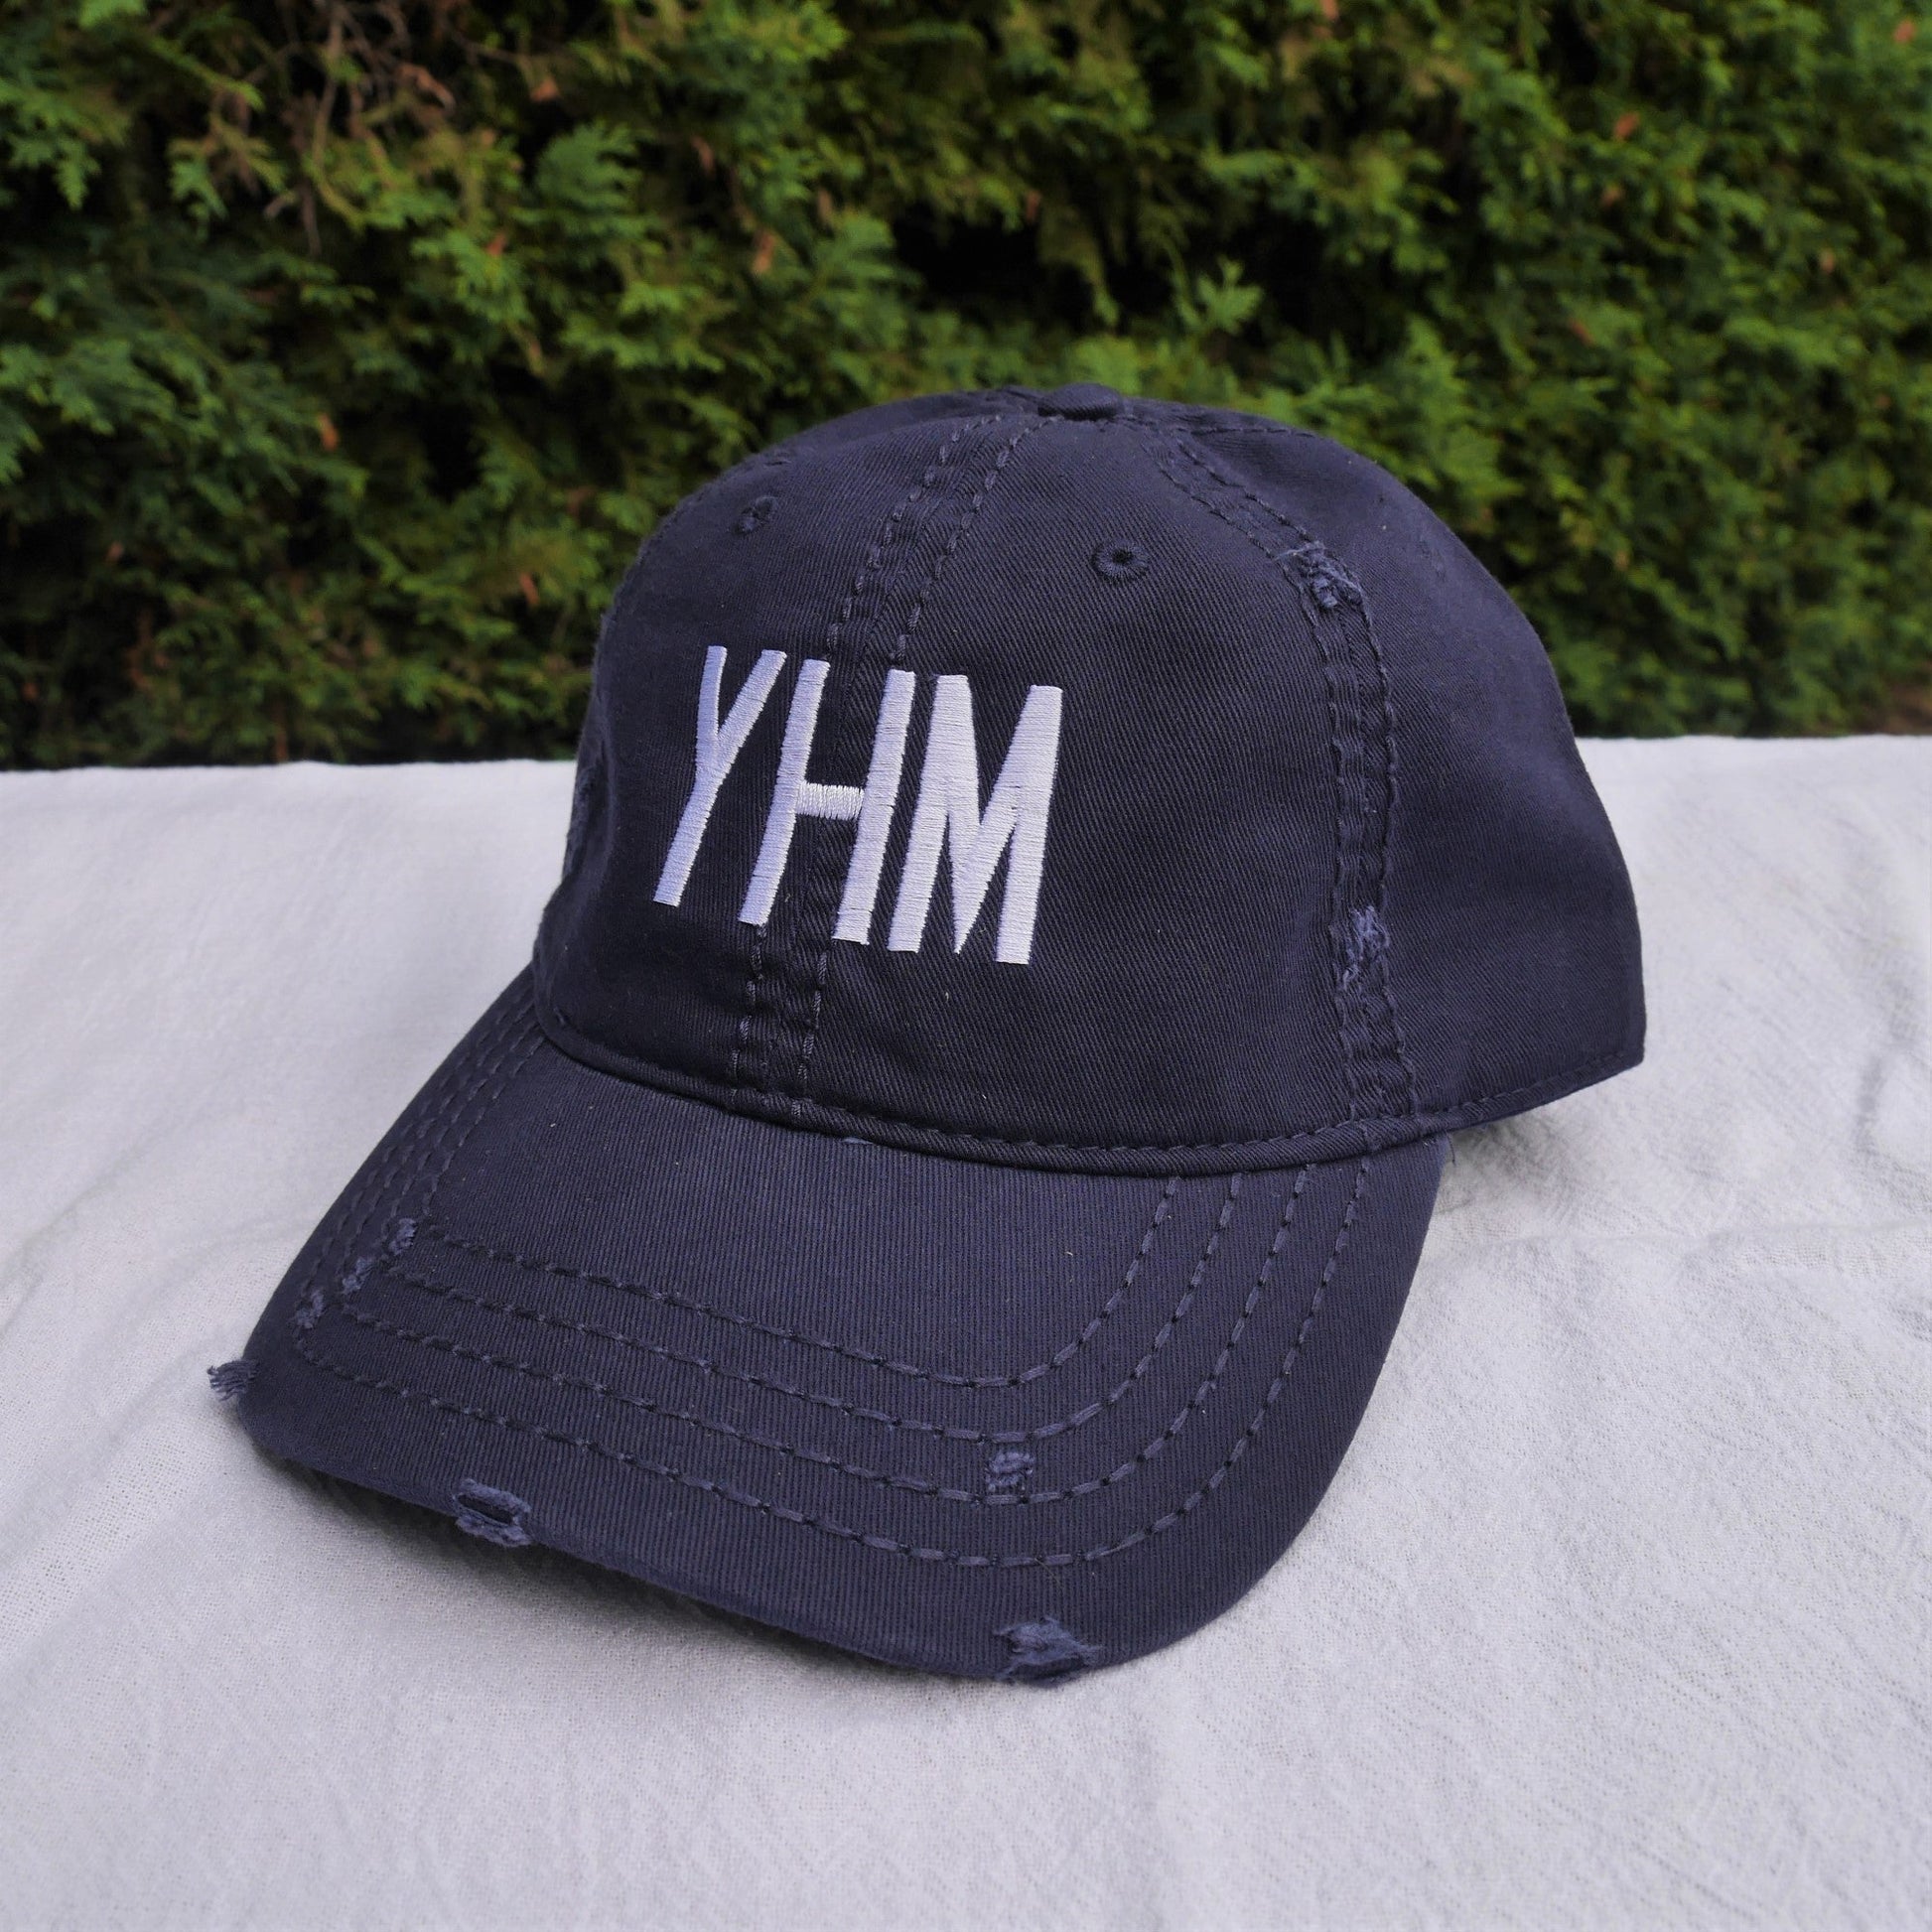 Airport Code Distressed Hat - White • RIC Richmond • YHM Designs - Image 21